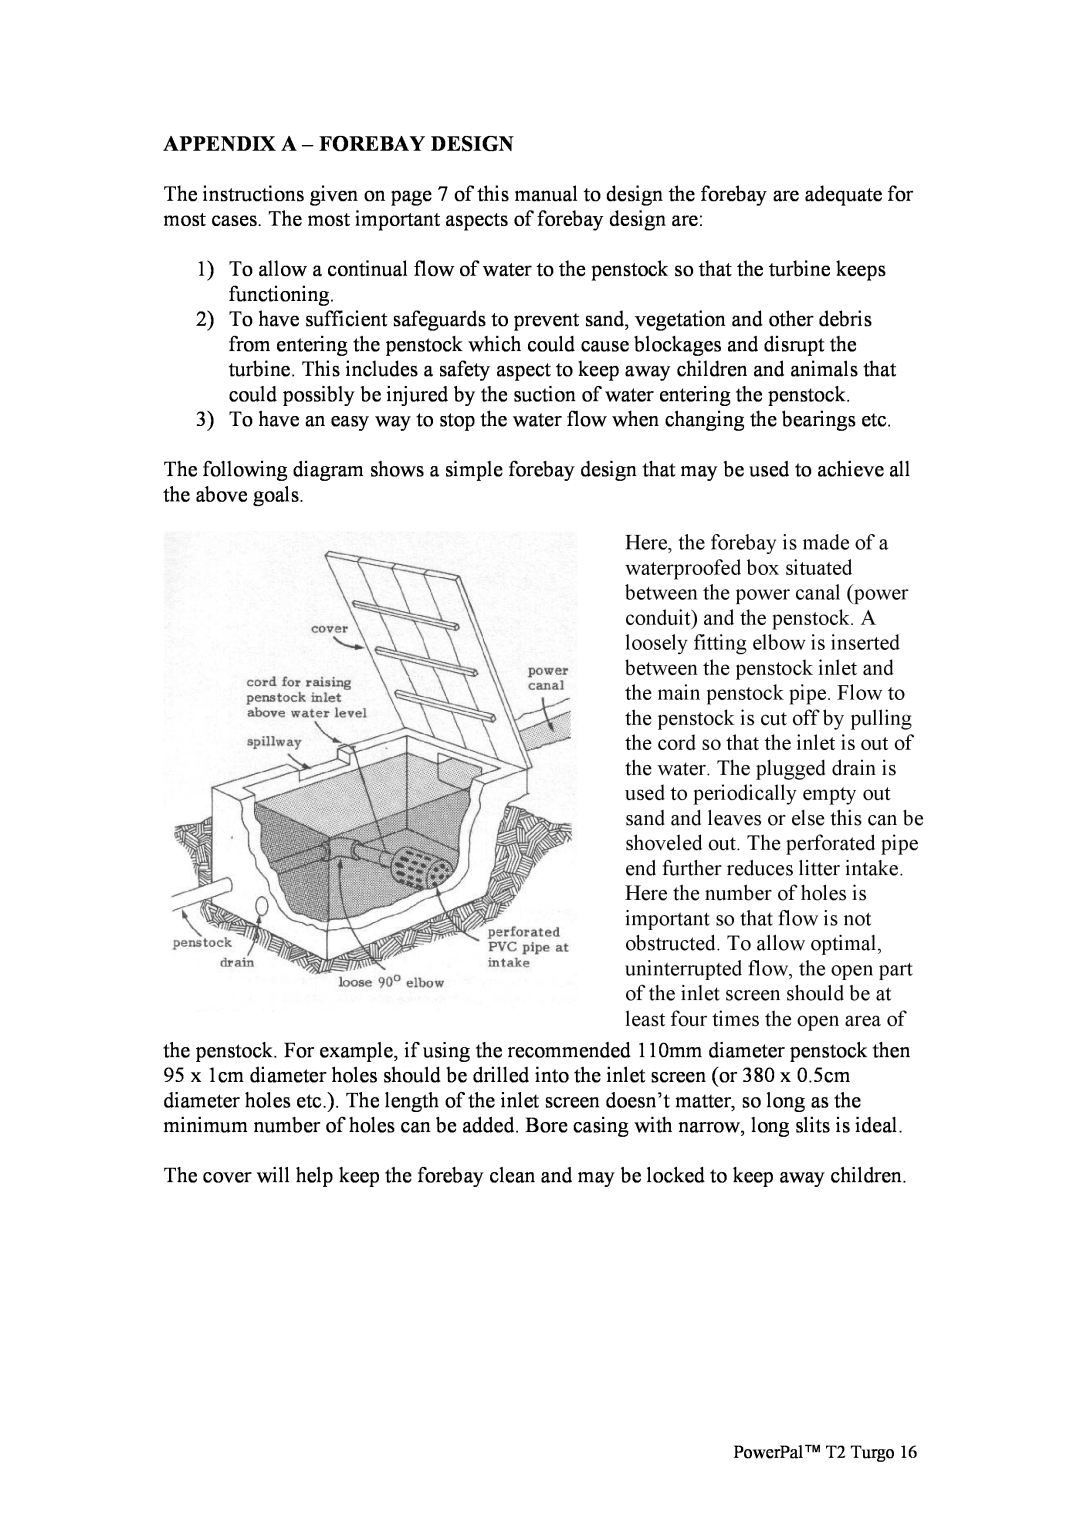 Asian Resources Int'l Limited MHG-T2 manual Appendix A - Forebay Design 